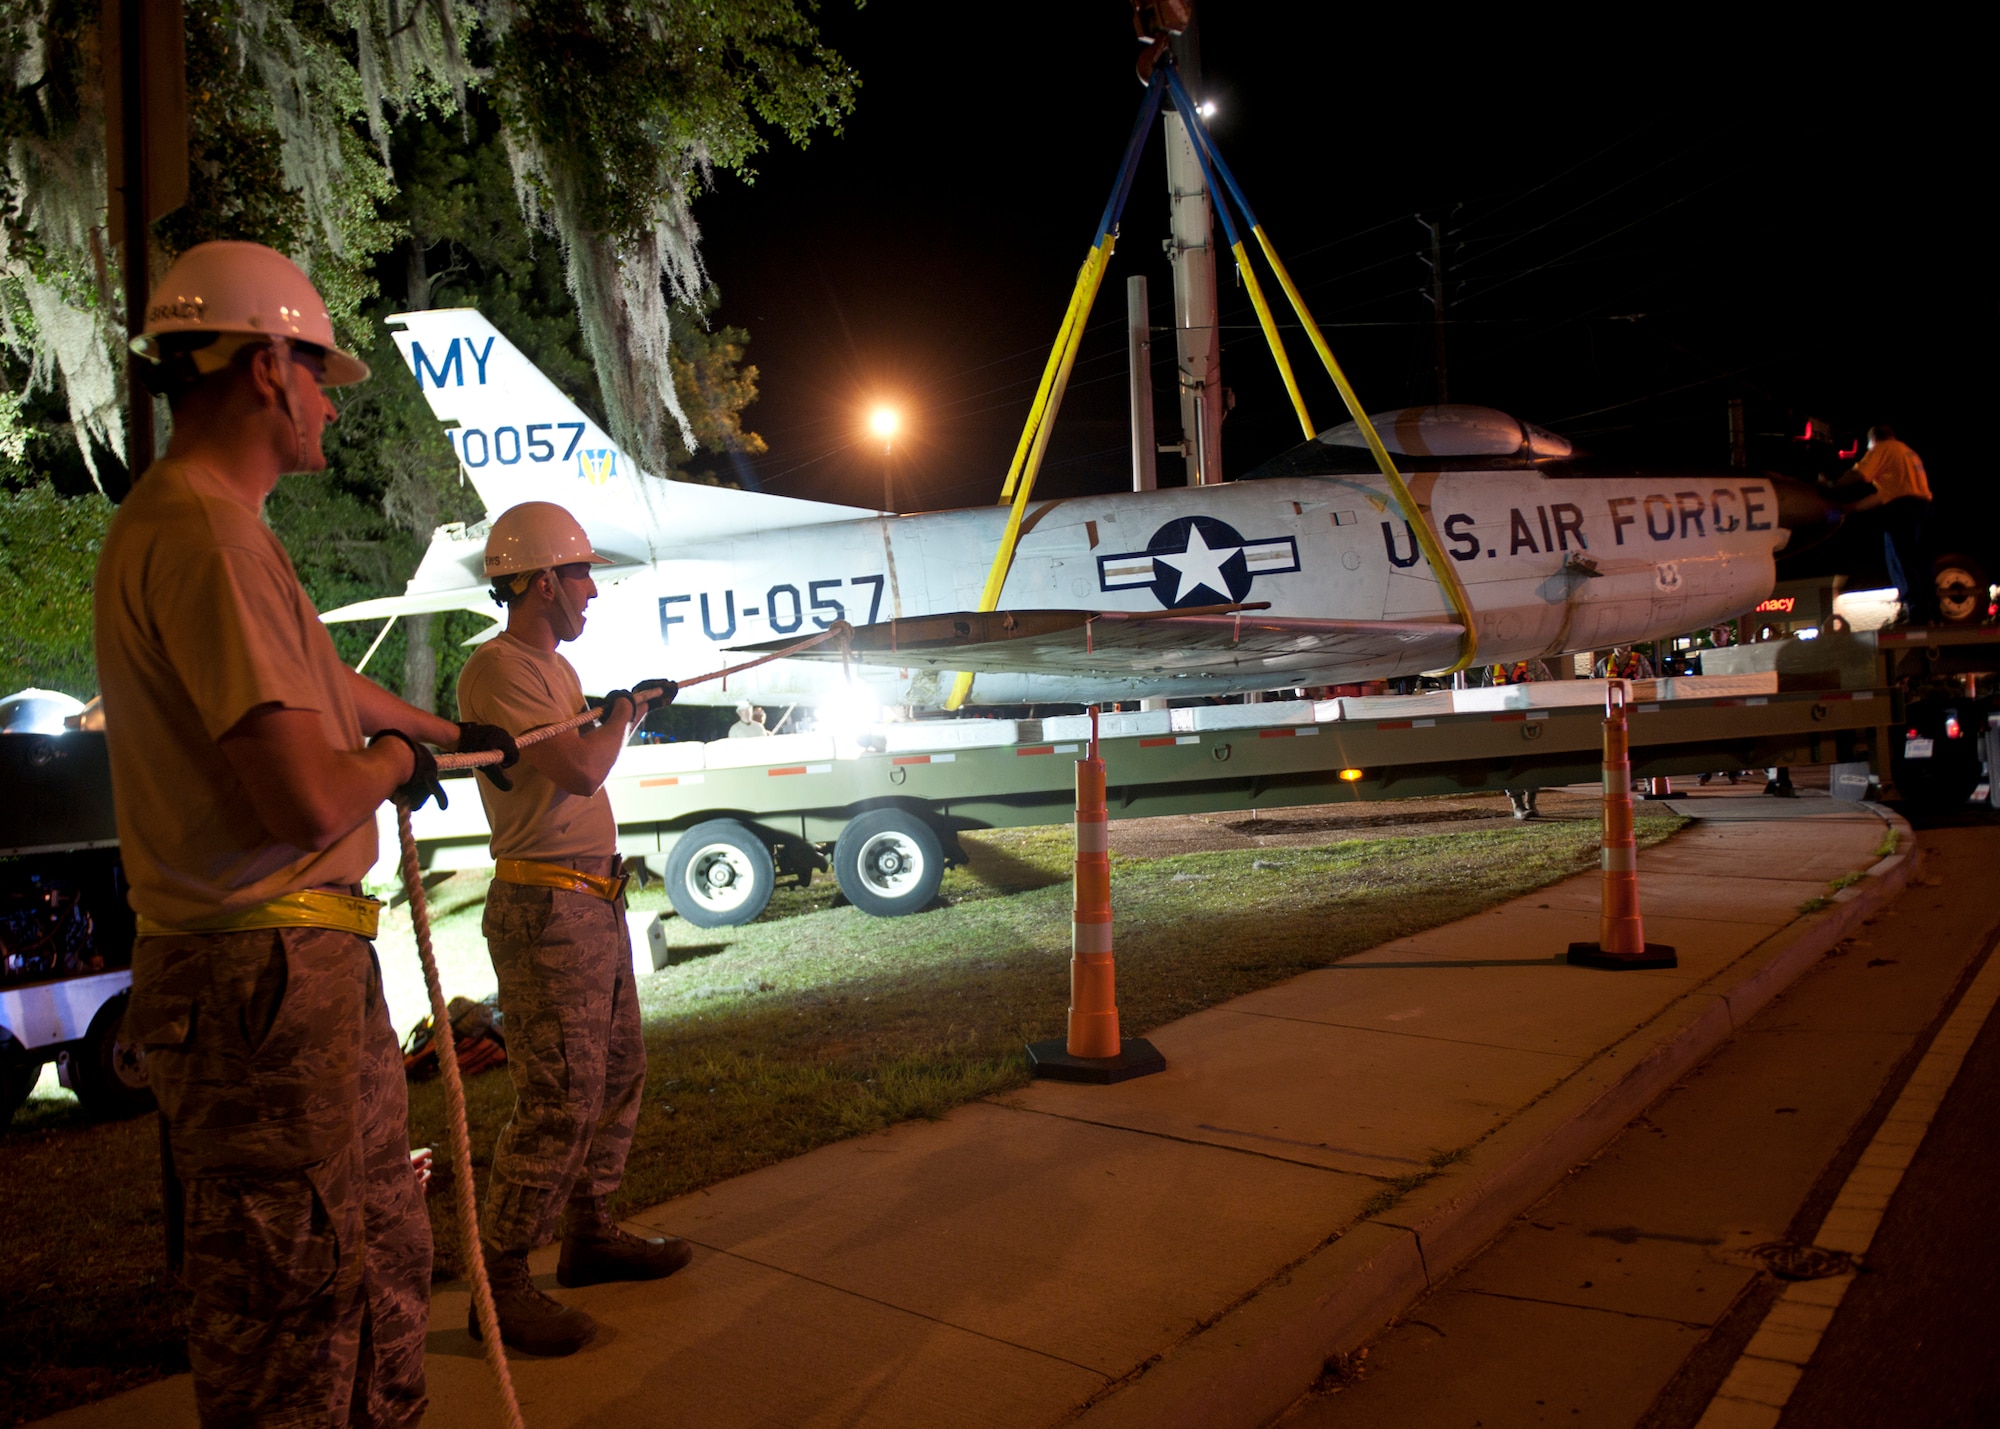 U.S. Air Force Staff Sgts. Ryan Adams-Brady and Christopher Matthews, 23d Equipment Maintenance Squadron, assist in guiding an F-86L Sabre onto a flatbed trailer that will transport it to Moody Air Force Base, Ga., April 24, 2012. The aircraft will be refurbished and then moved to the George W. Bush Air Park at Moody Field to commemorate the late Maj. Lyn McIntosh and the Flying Tigers heritage. (U.S. Air Force photo by Senior Airman Eileen Meier/Released)